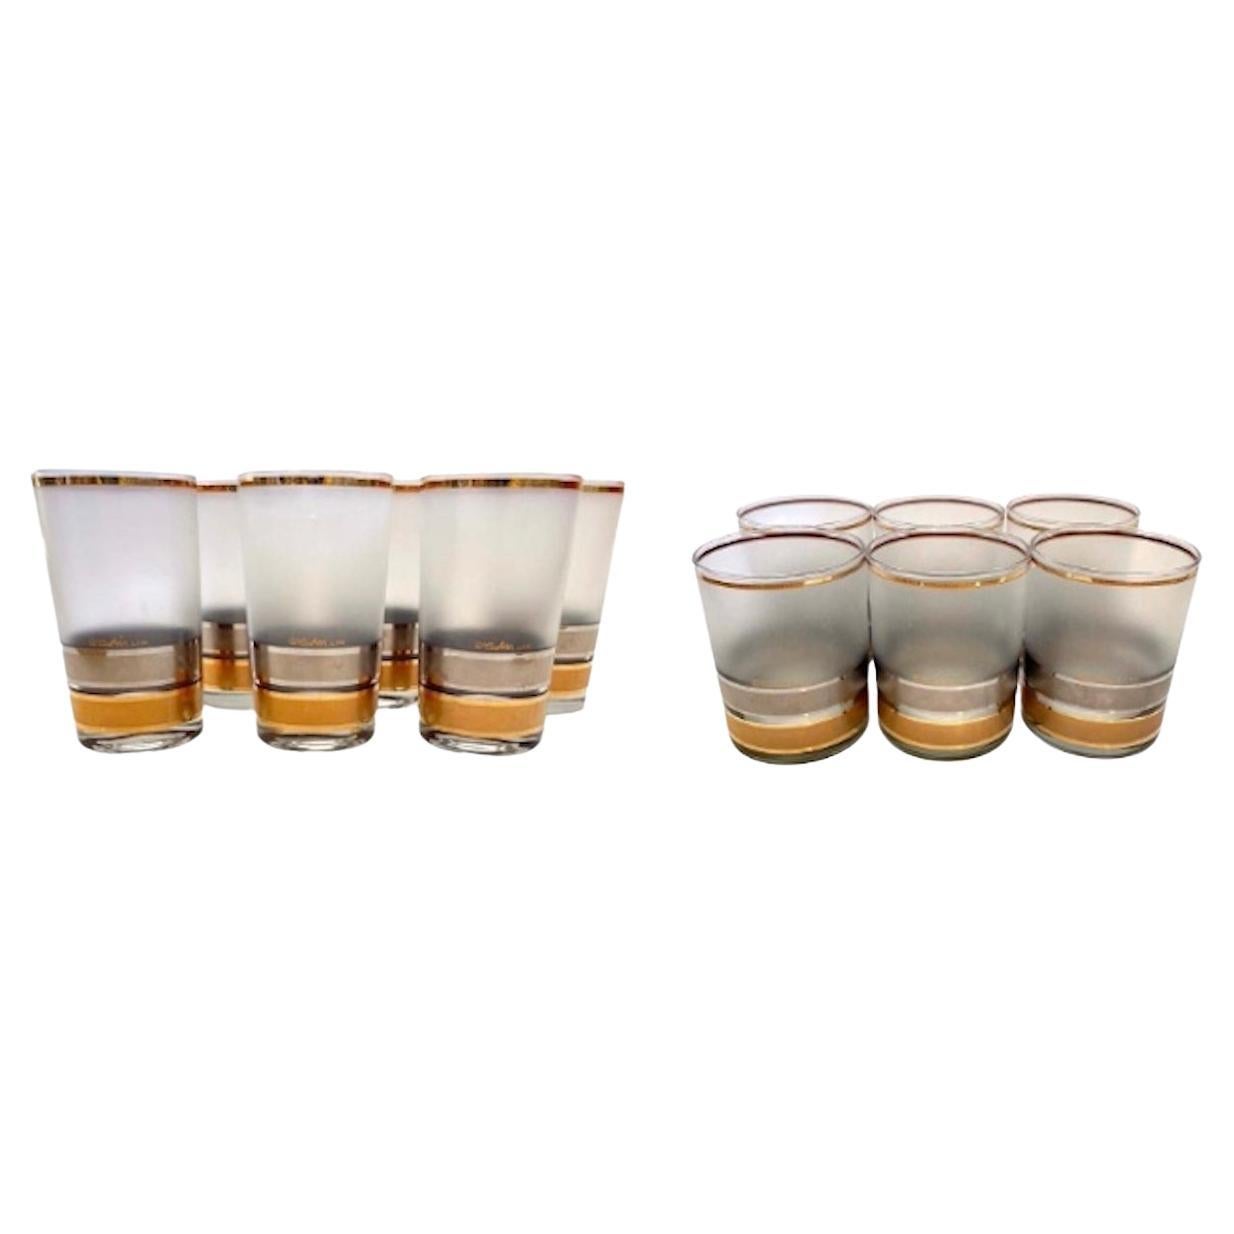 https://a.1stdibscdn.com/set-of-12-collins-and-high-ball-culver-glasses-with-22-k-gold-regency-pattern-for-sale/f_53252/f_258345721635106847926/f_25834572_1635106848144_bg_processed.jpg